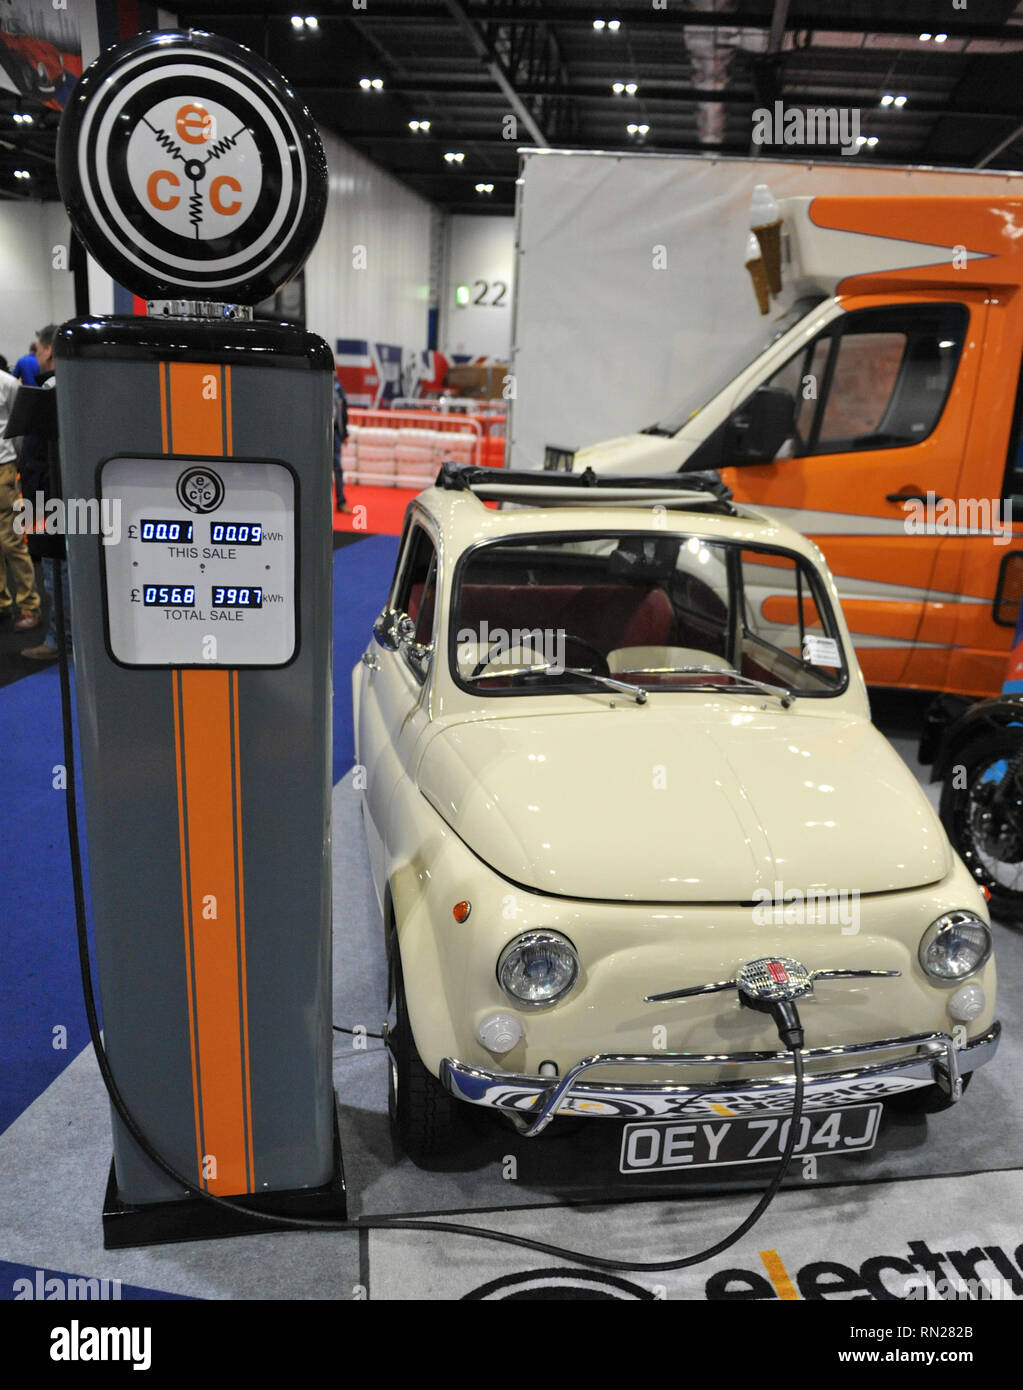 London, UK. 16th Feb 2019. A 1970 Fiat 500L, converted to run on electrical power, on display at the London Classic Car Show which is taking place at ExCel London, United Kingdom.   Credit: Michael Preston/Alamy Live News Stock Photo